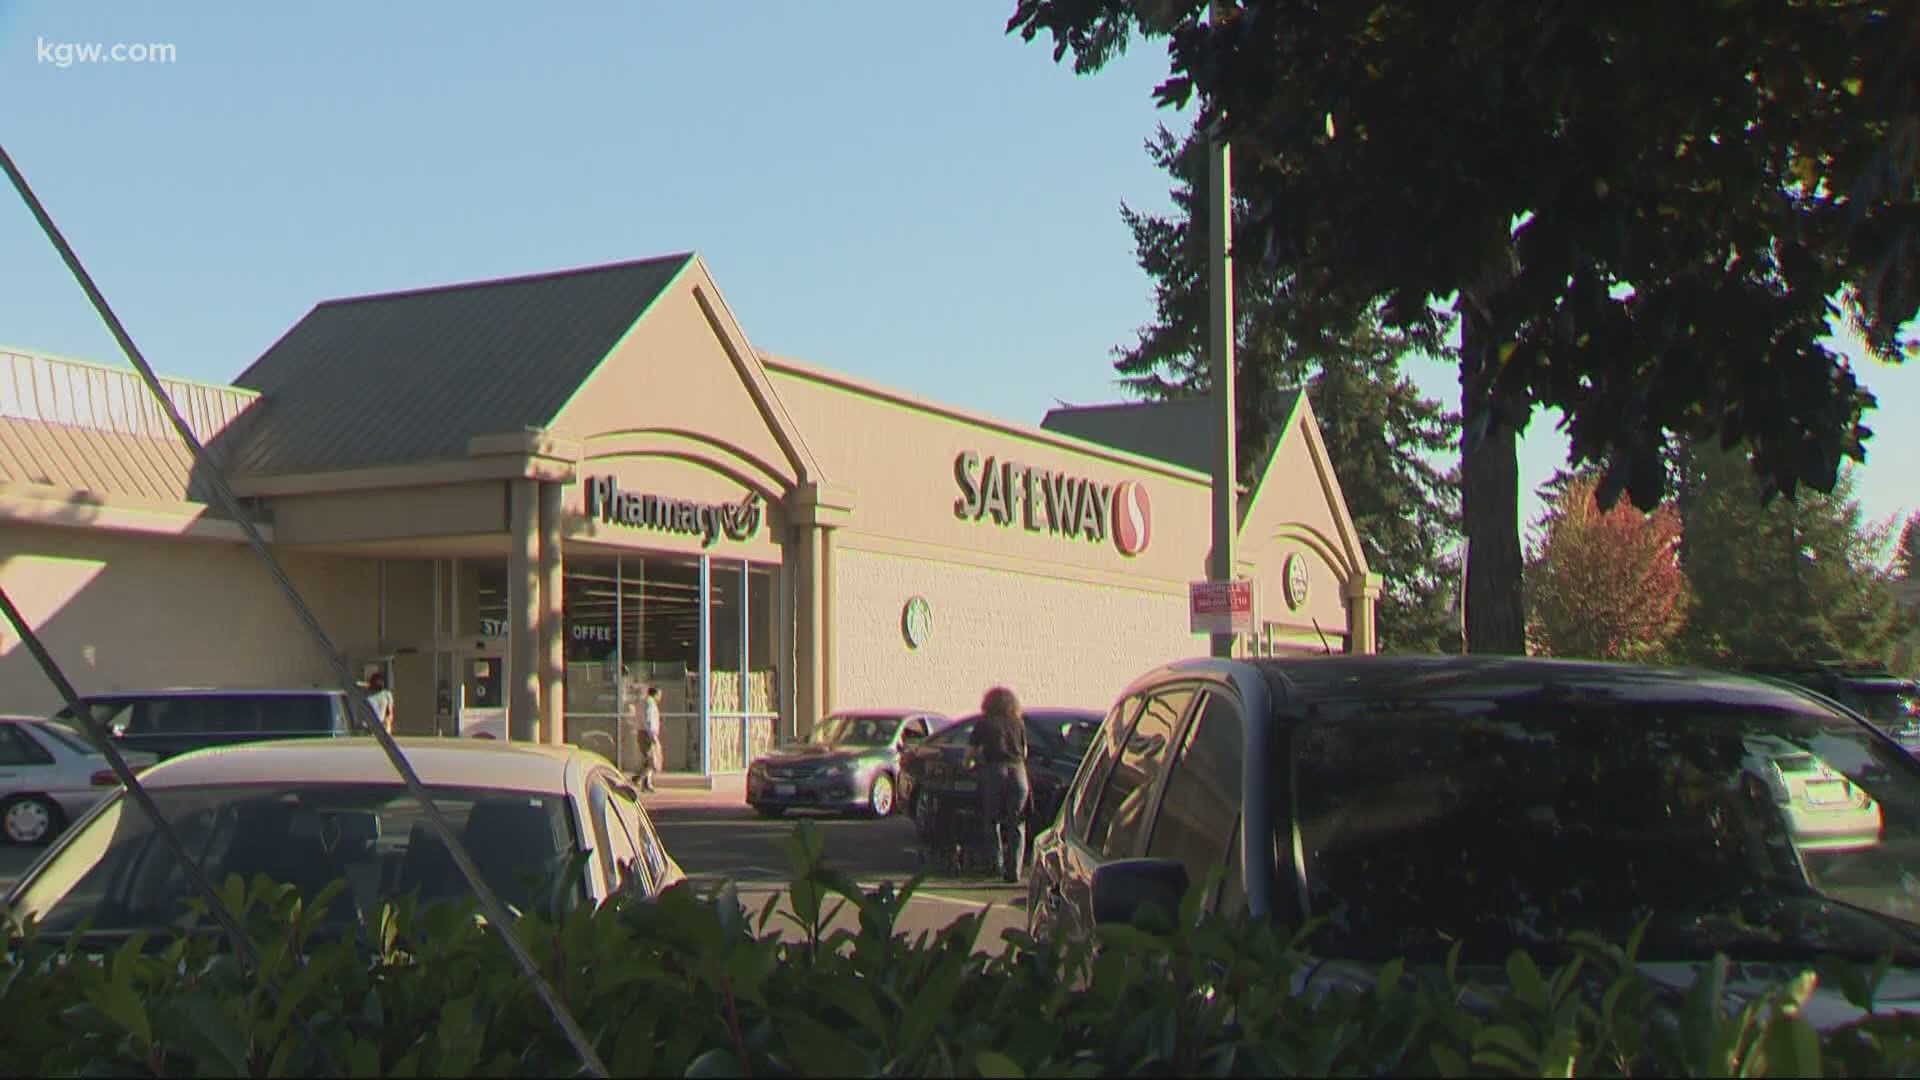 Safeway and Albertsons pharmacies are joining the fight against COVID-19. The pharmacies in Oregon and Southwest Washington are now offering at-home test kits.